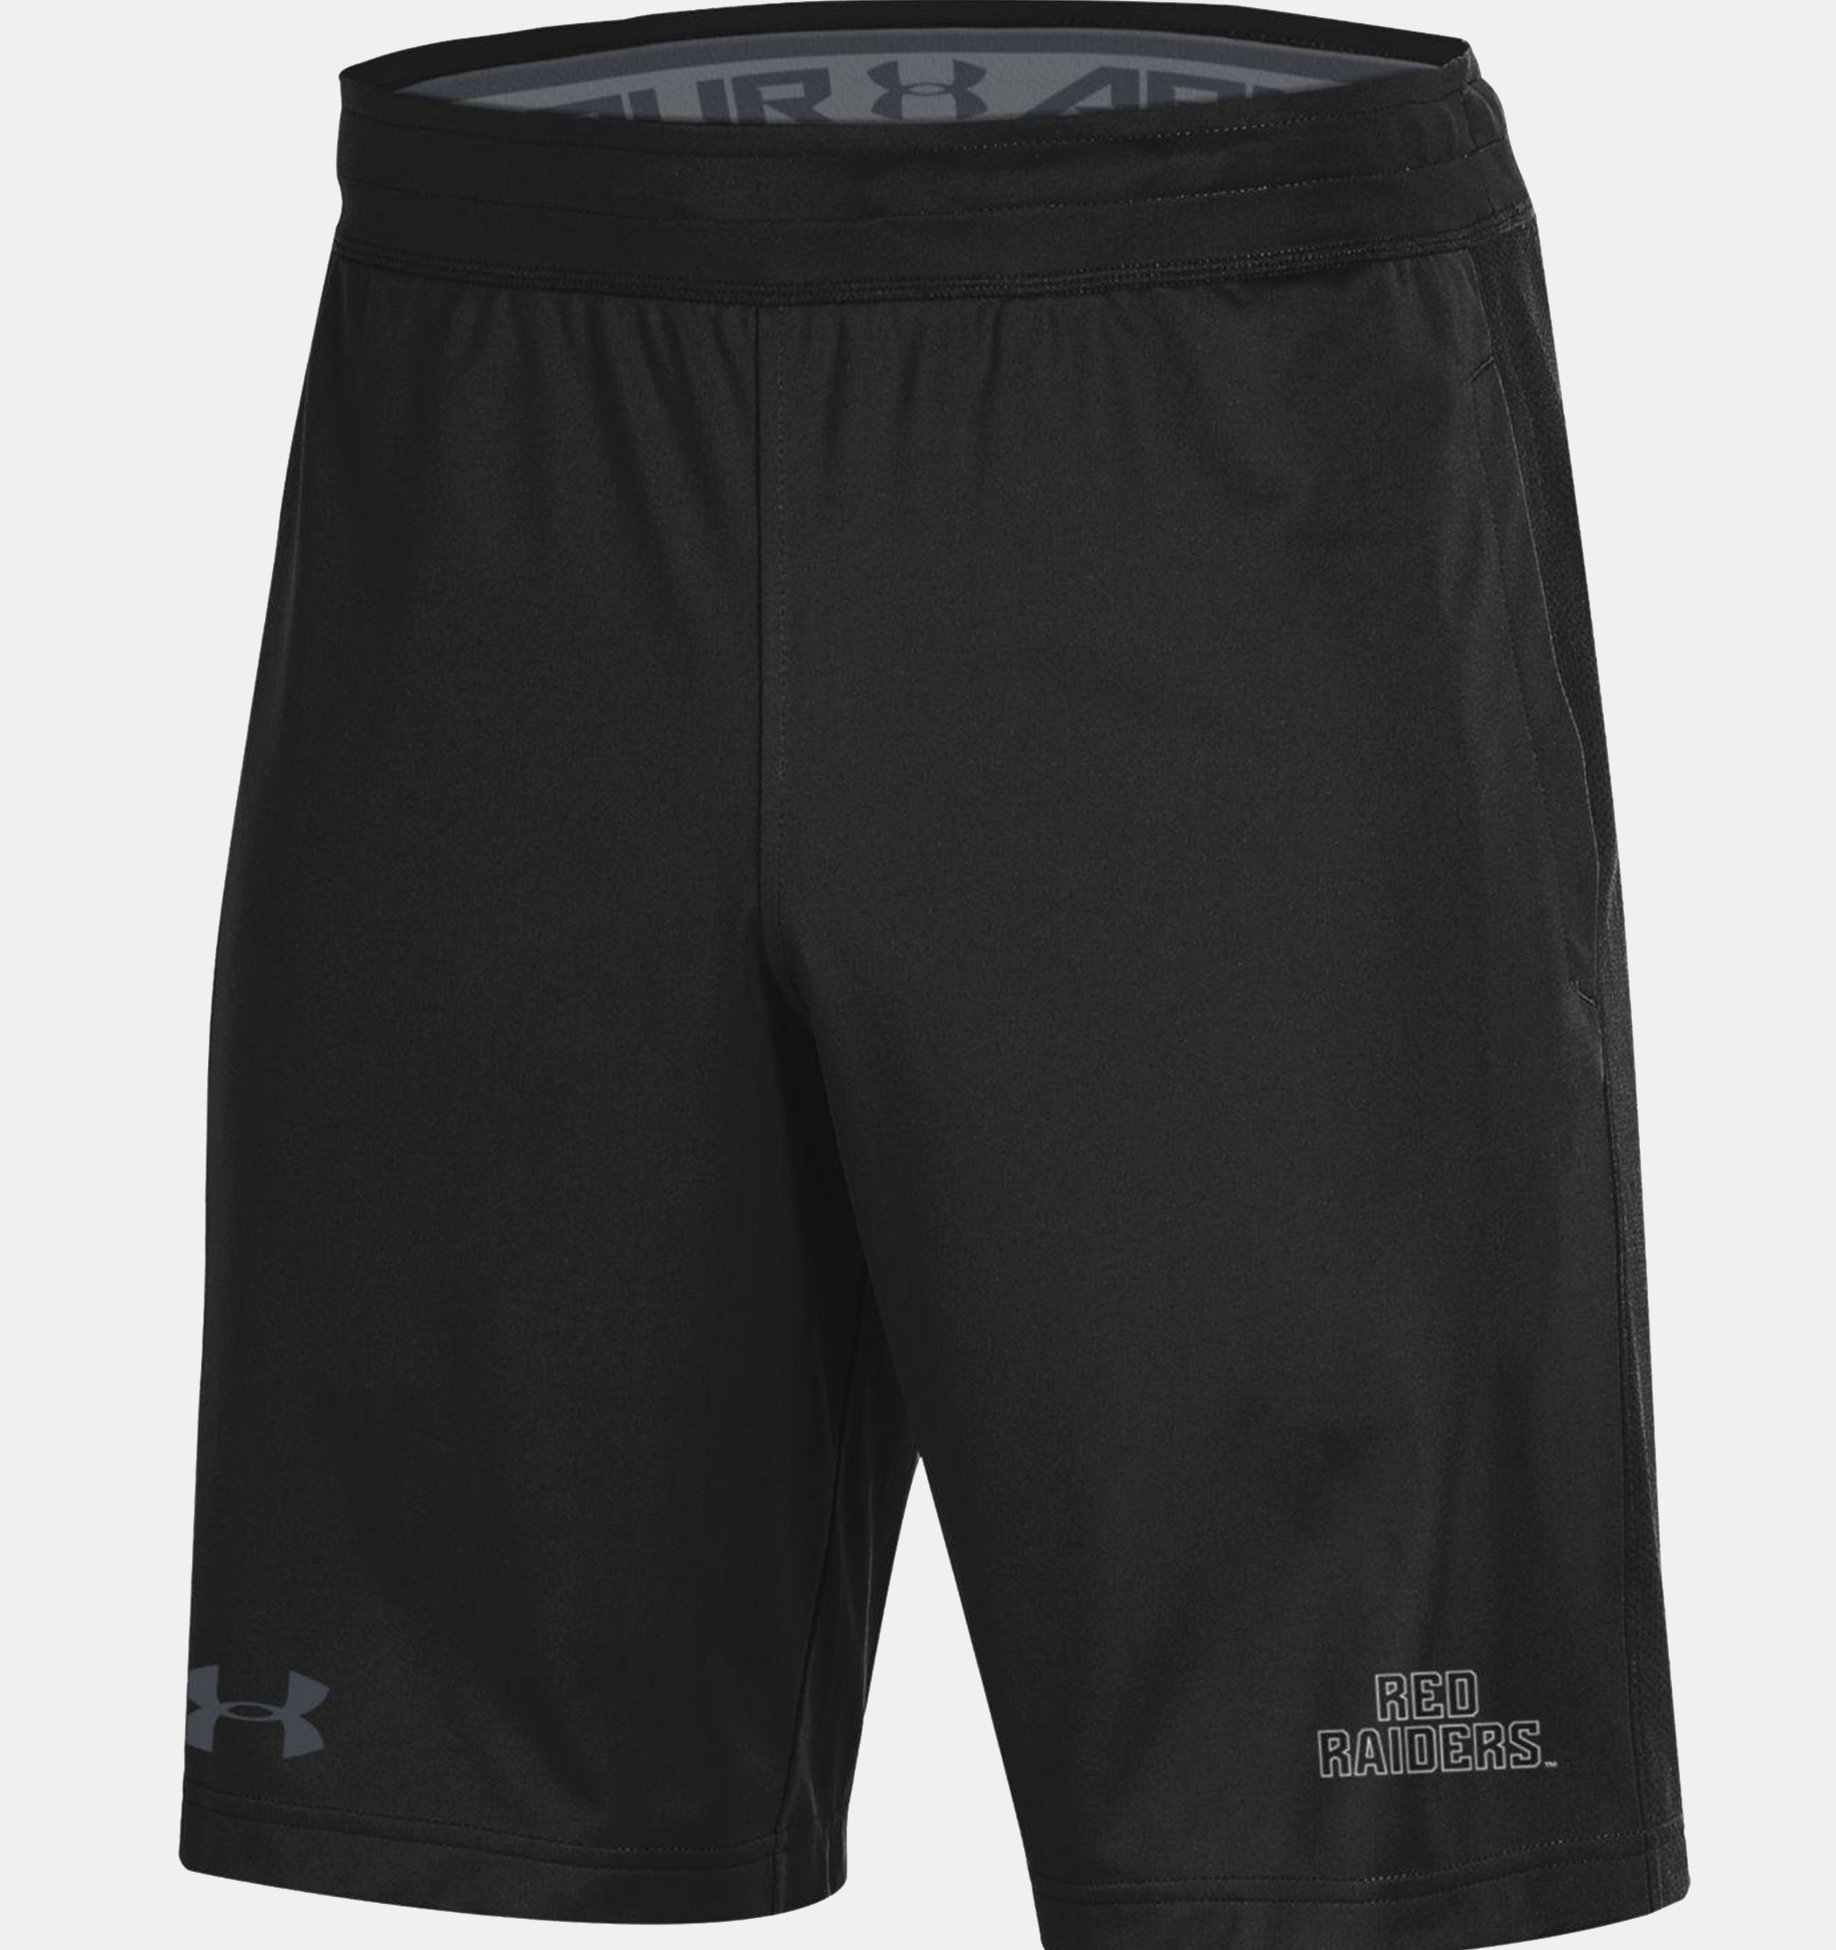 Ultralight & Fast-Drying Workout Shorts for Men Under Armour Men UA RAID 8 Shorts Loose Sports Shorts with 4-Way Stretch Fabric